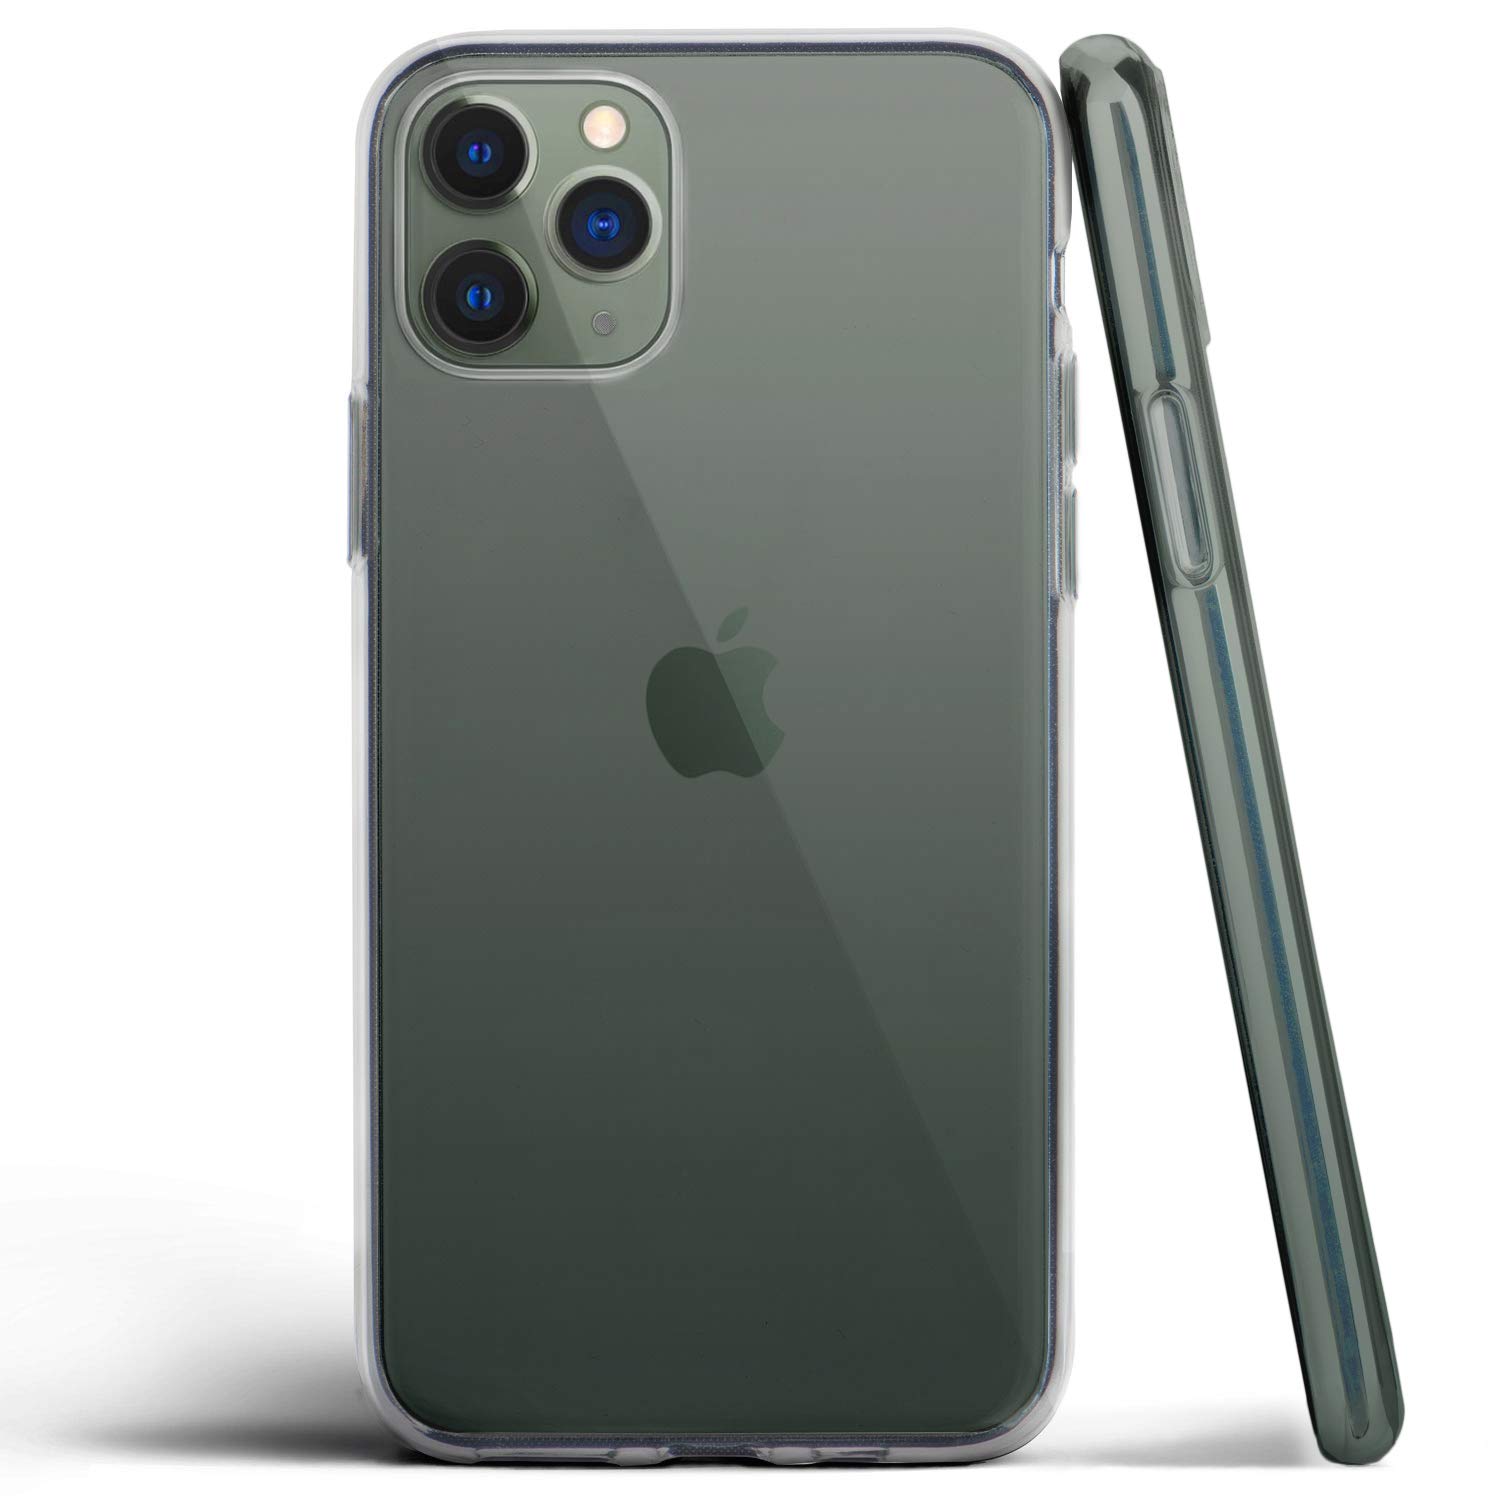 Totallee Thin Case for iPhone 11 Pro